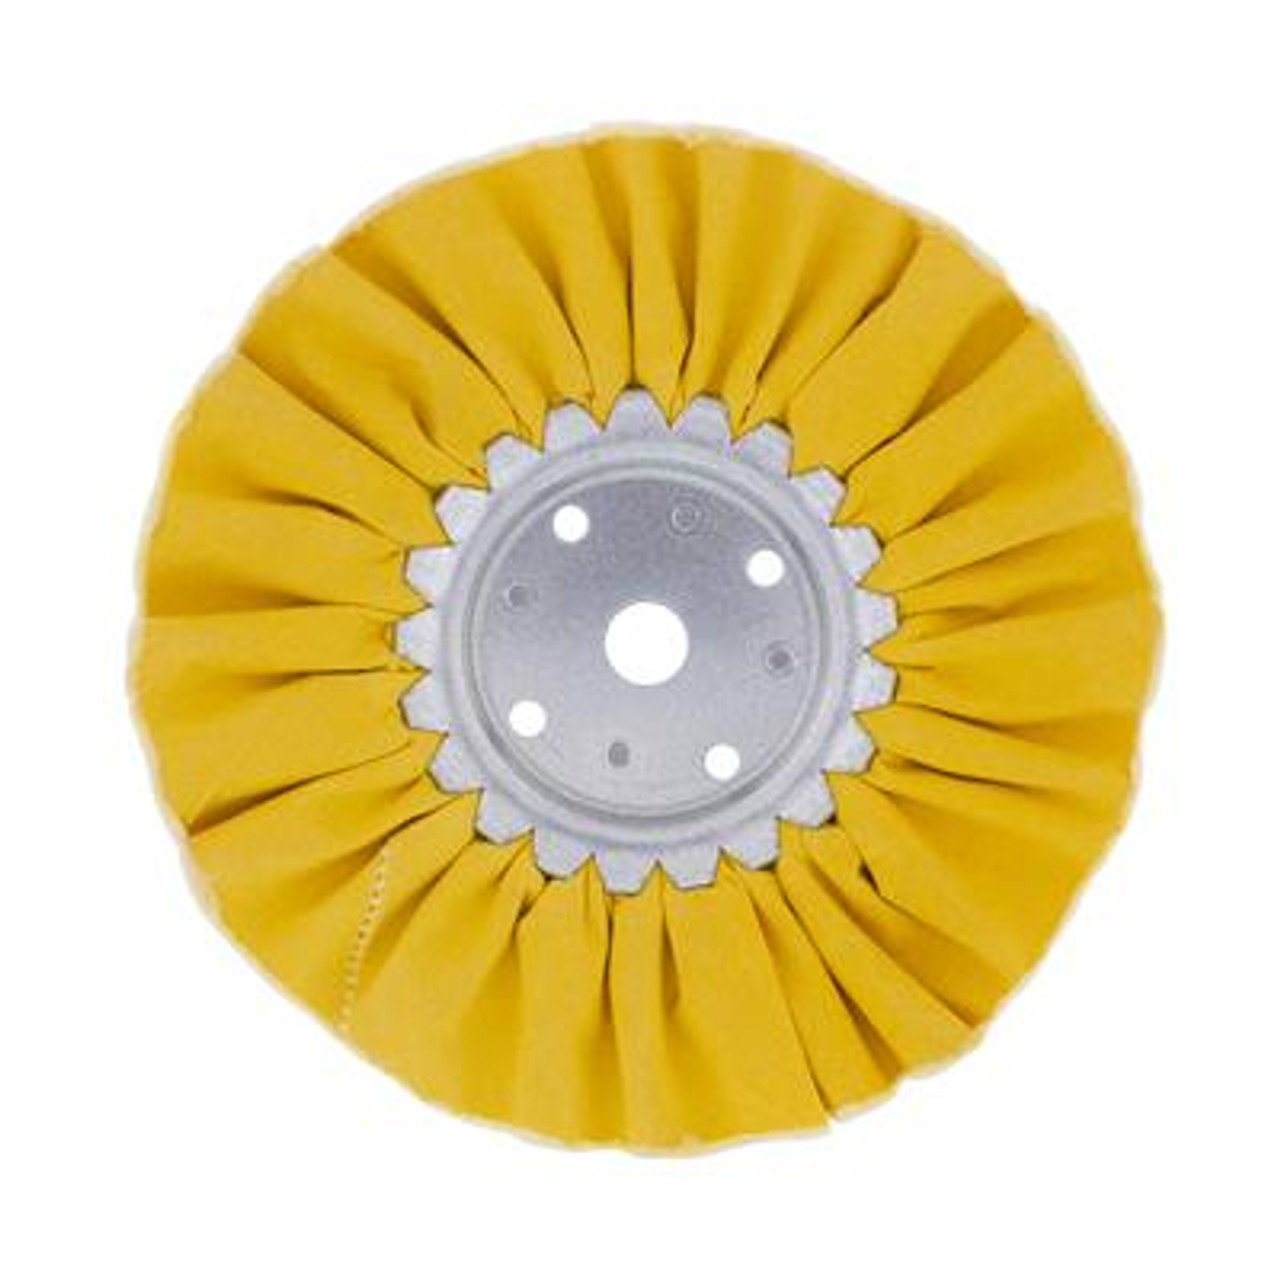 Getting the right buffing wheel is extremely essential to the buffing process. United Pacific has a wide range of different kinds of wheels to choose from.